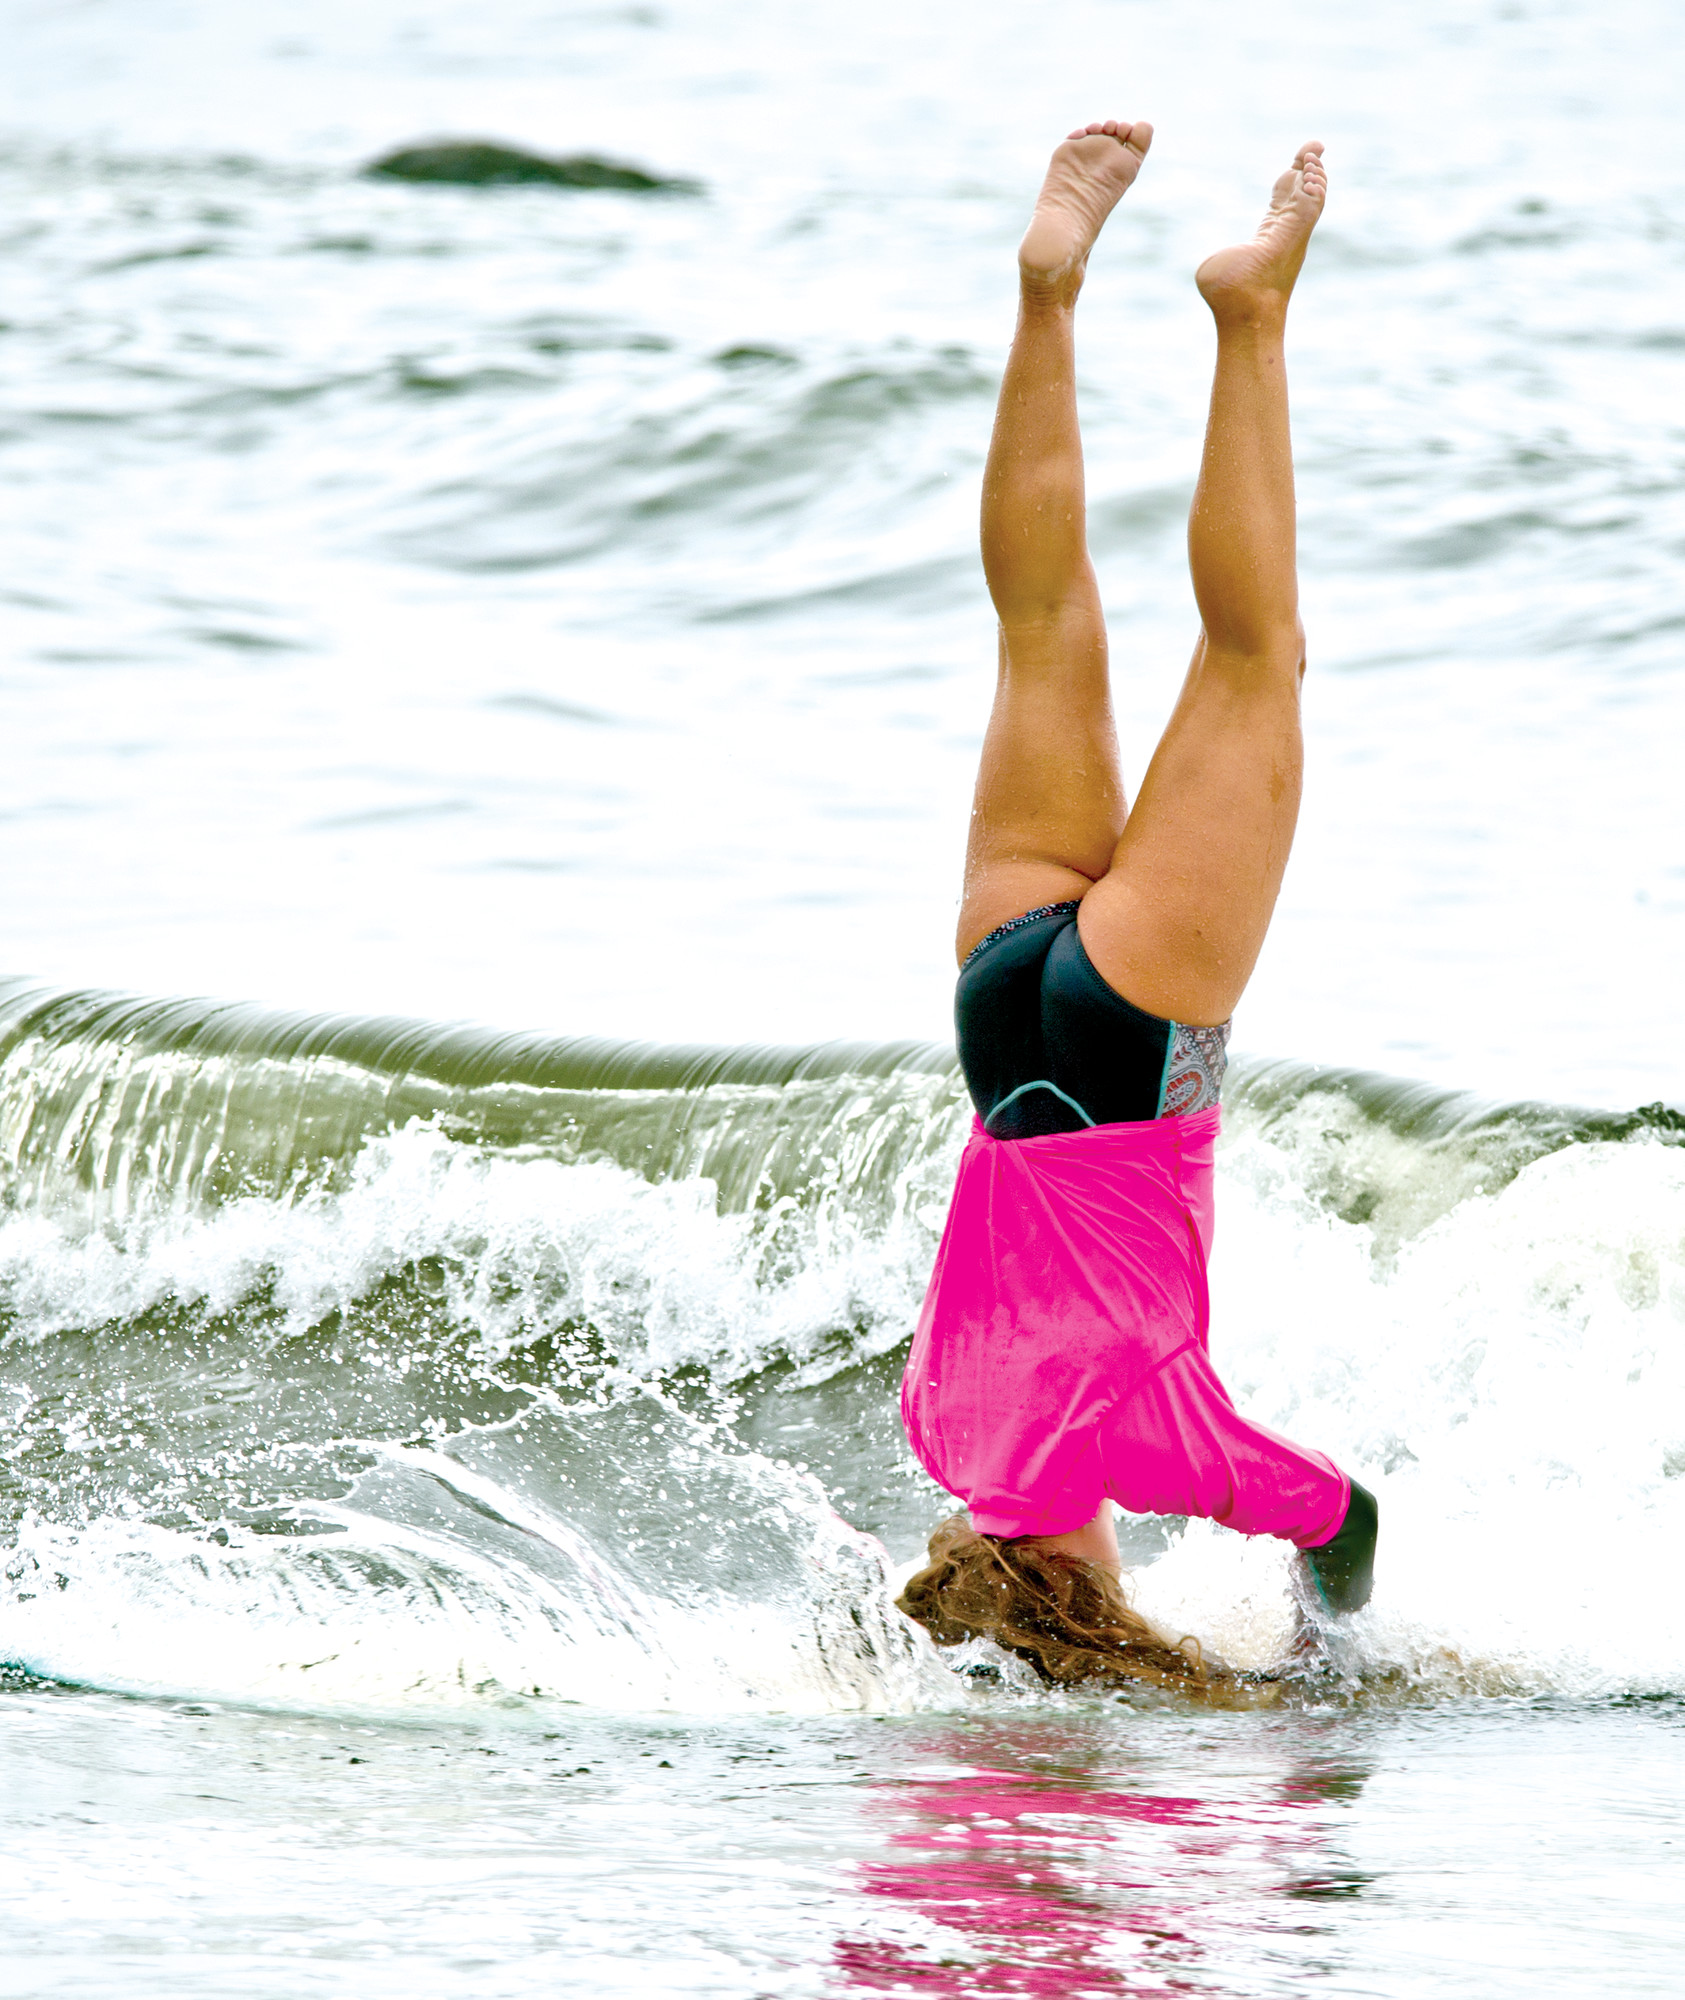 Long Beach resident Dakota Ejnes impressed the crowd with her creativity by performing a handstand at Moku Surf Shop’s second annual Longboard Classic last Saturday.